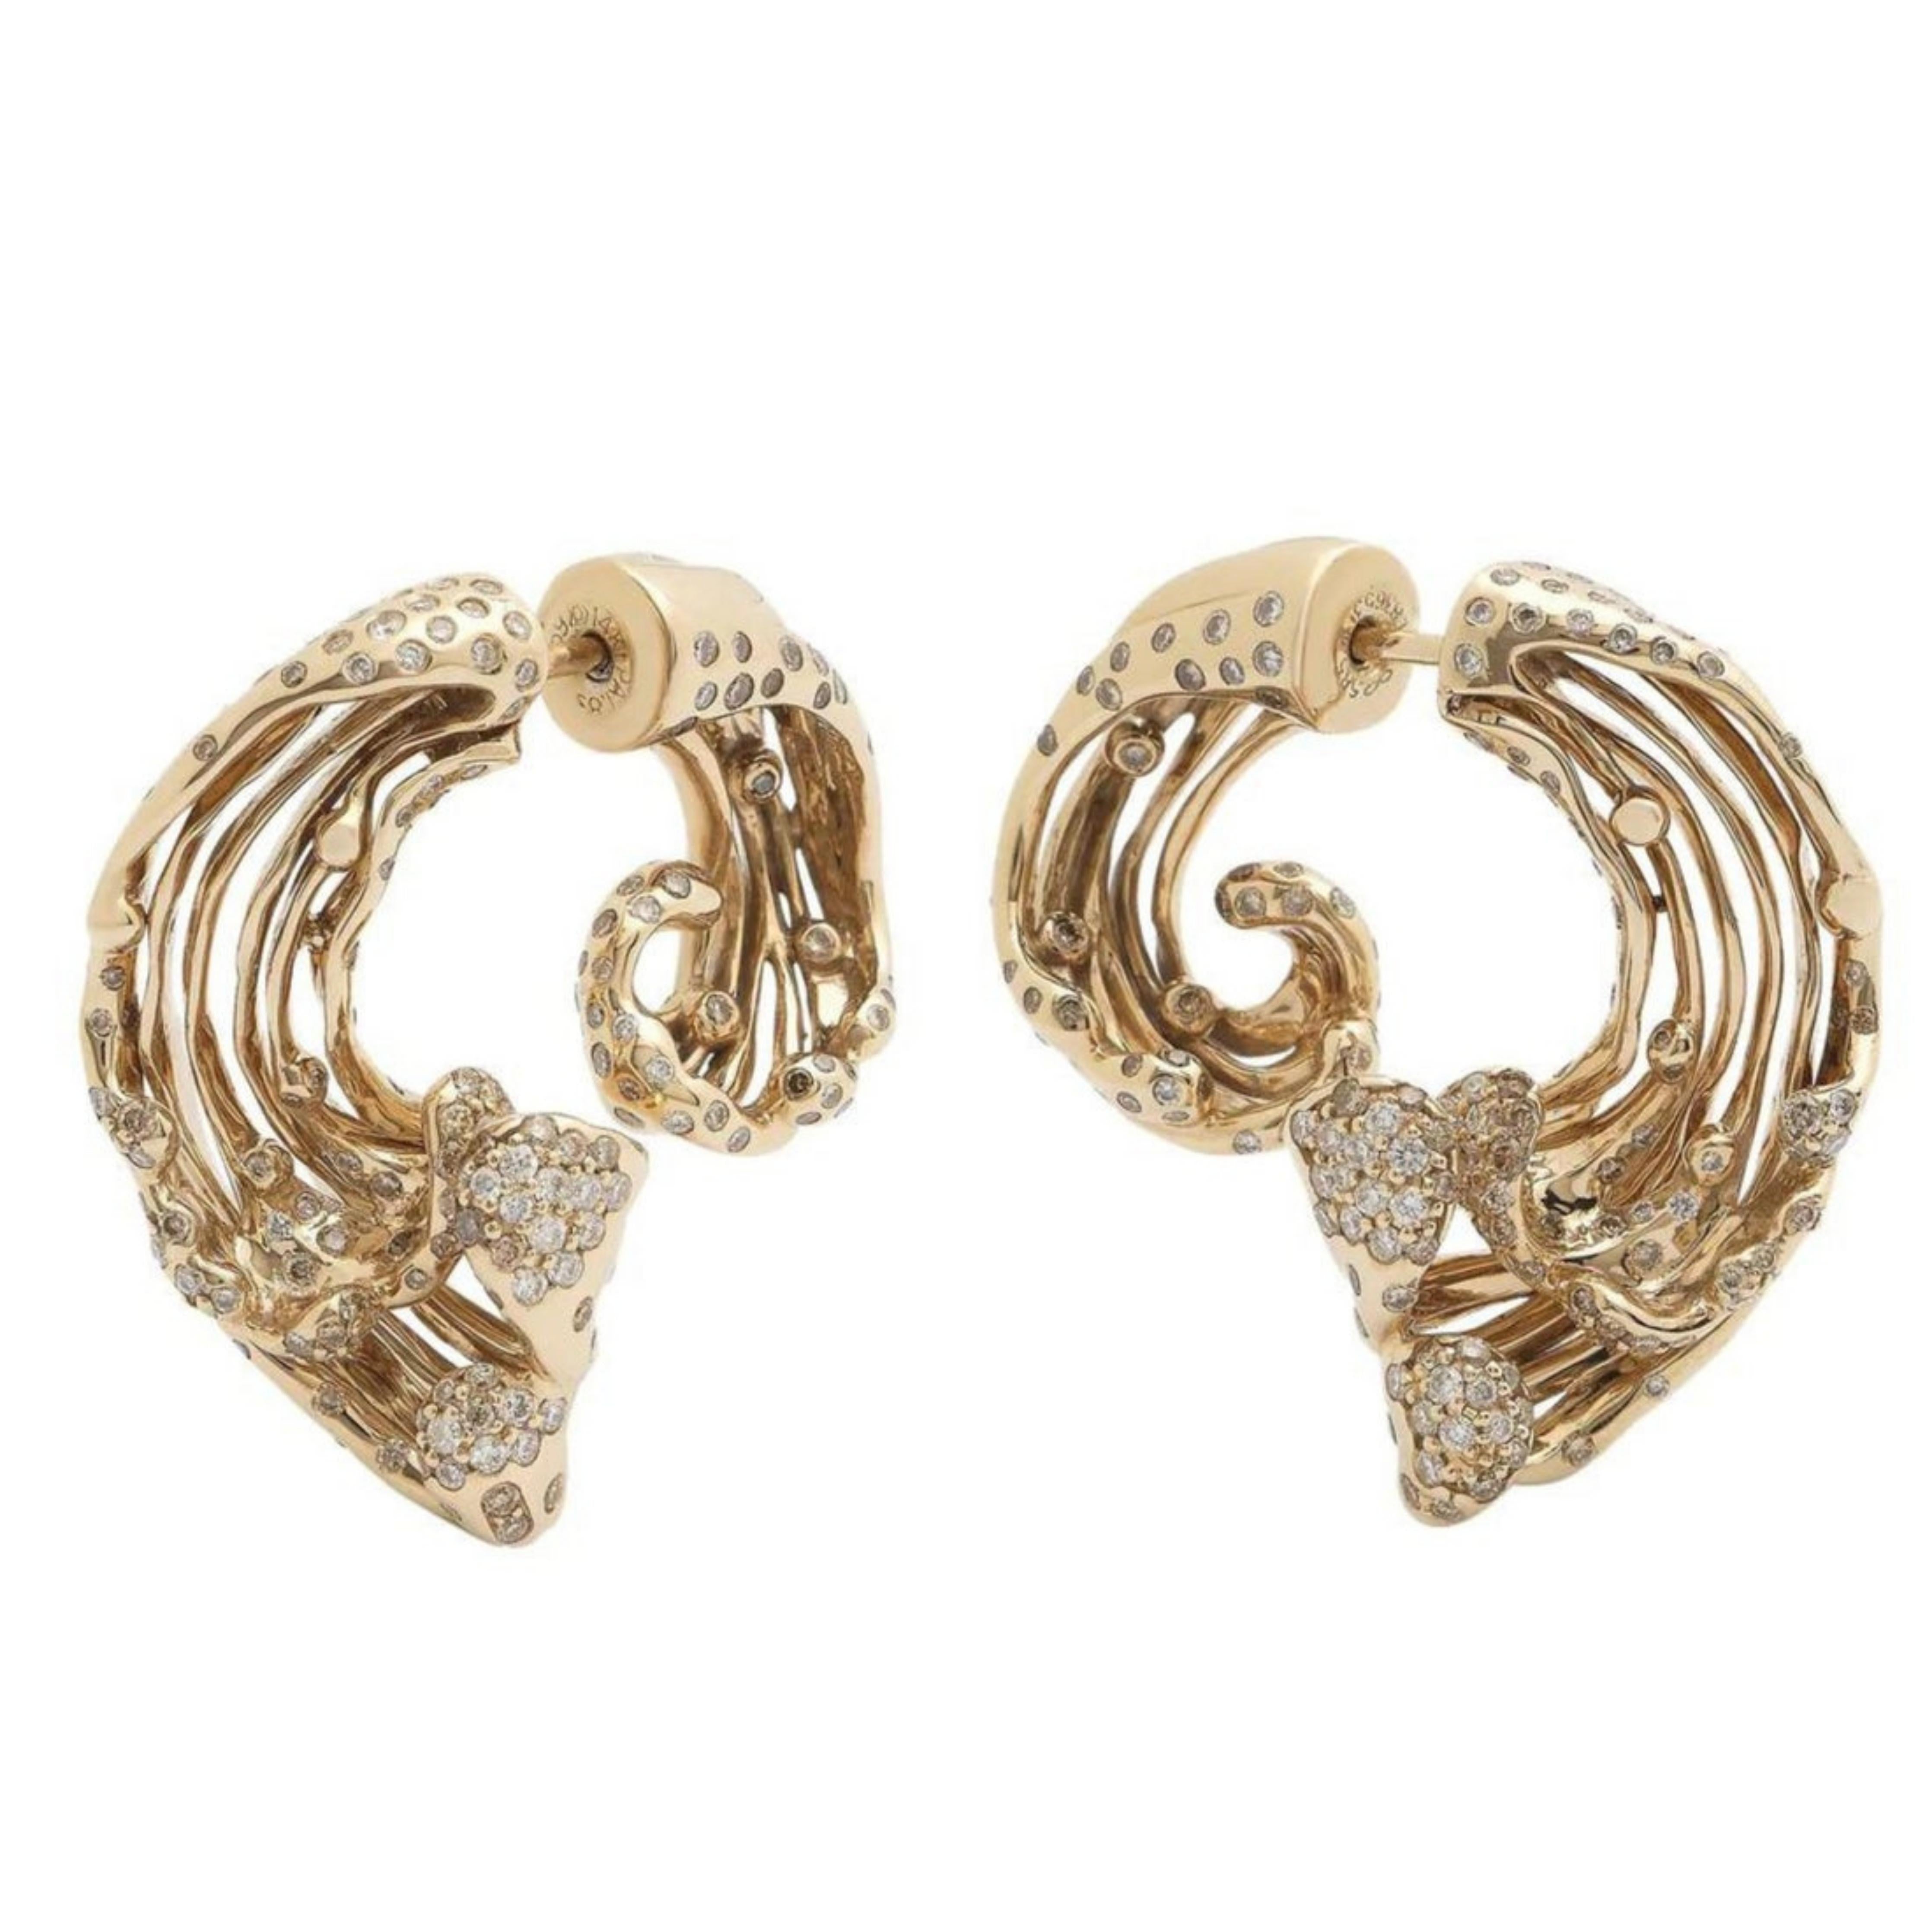 Bibi van der Velden Big Wave Earrings. Crafted from 18K Gold in the sculptural form of rolling waves, the crests of the waves are encrusted with white diamonds. The earrings go onto the ear at mid point, creating a dimensional look from both the front and back of the earring. Shown front view.